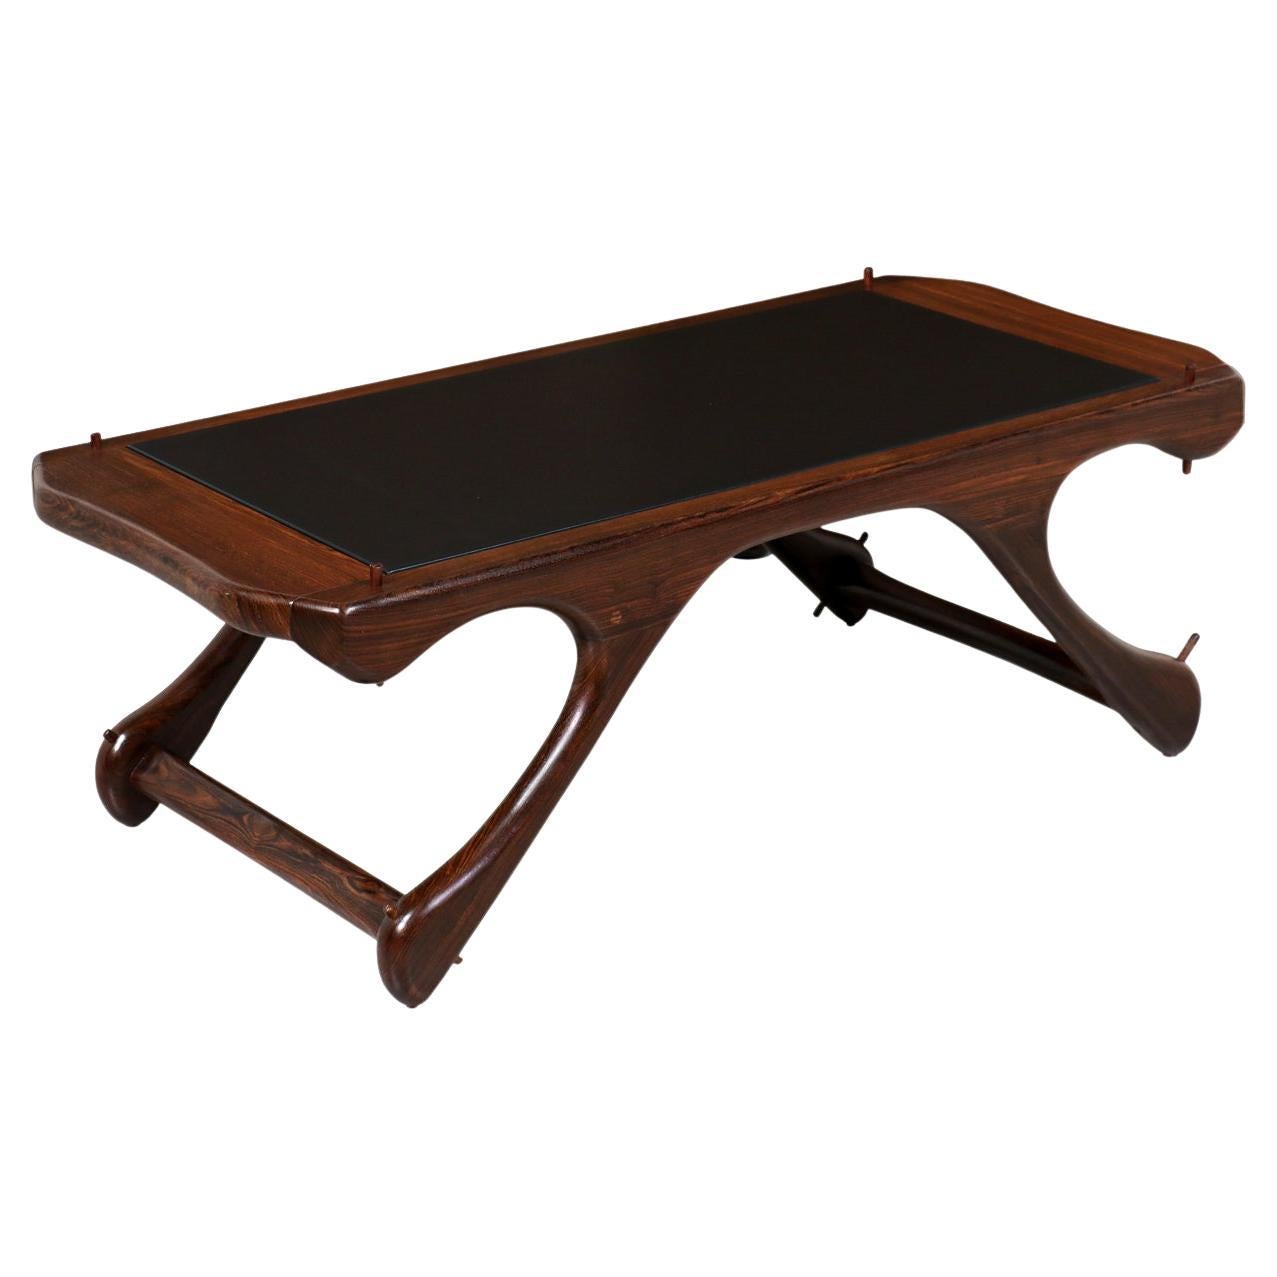 Don Shoemaker Sculpted Rosewood & Leather Coffee Table for Señal Furniture